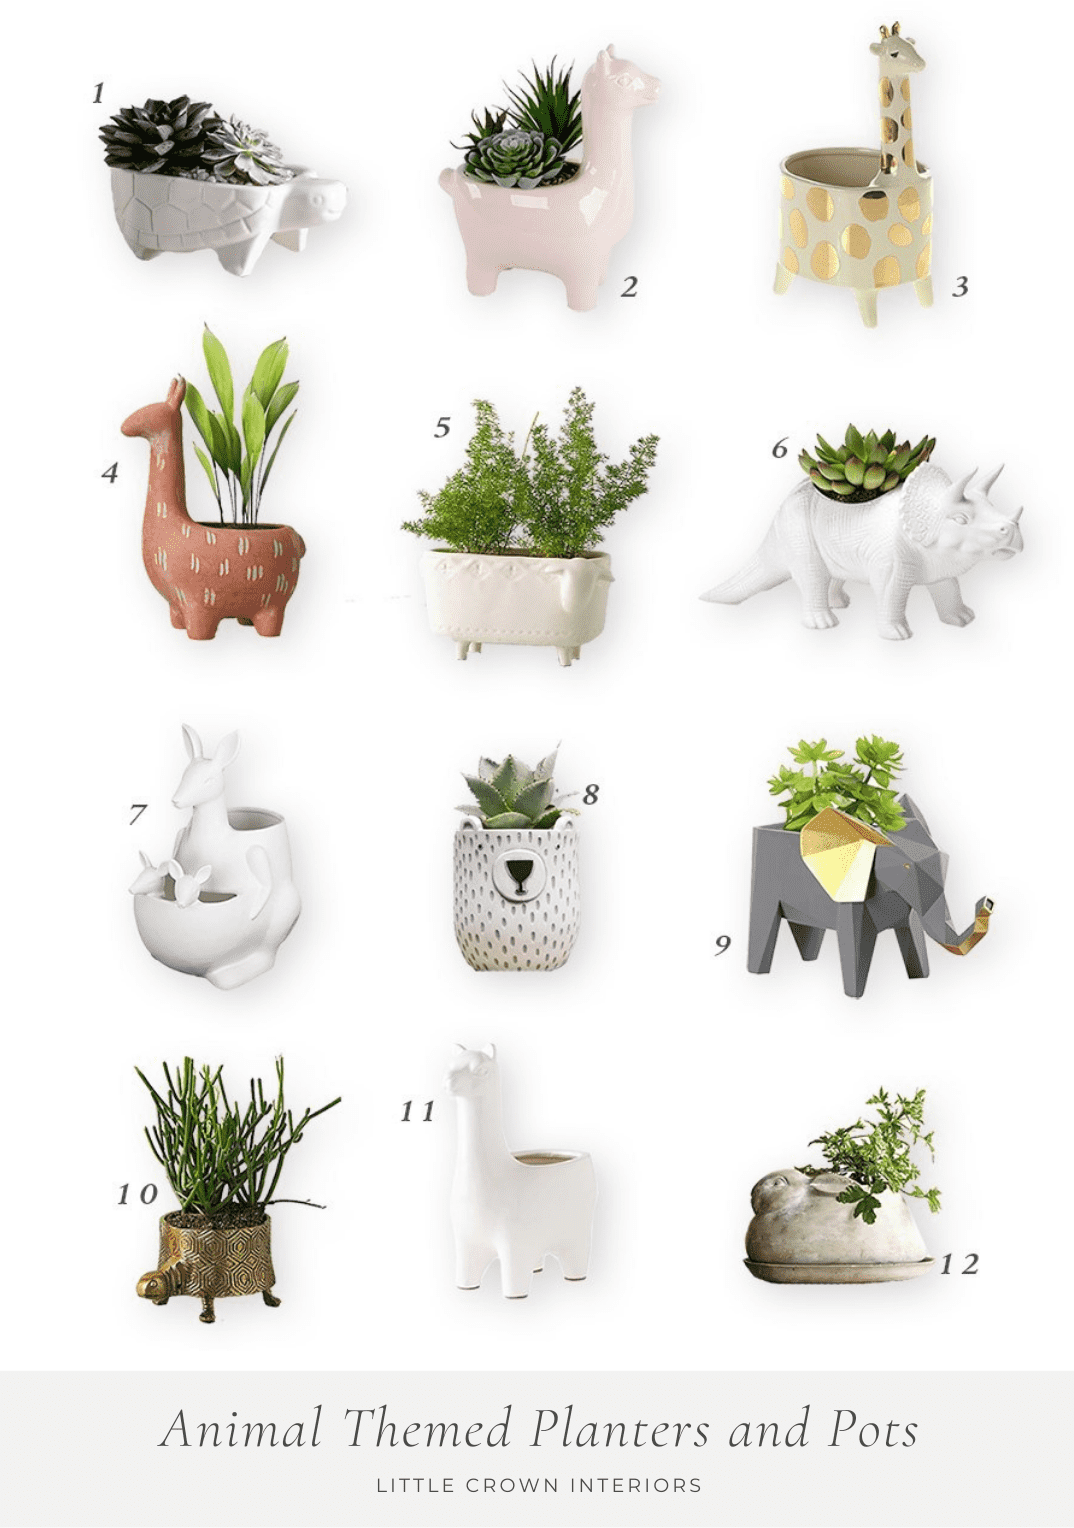 The Cutest Animal Themed Planters and Pots - Little Crown Interiors